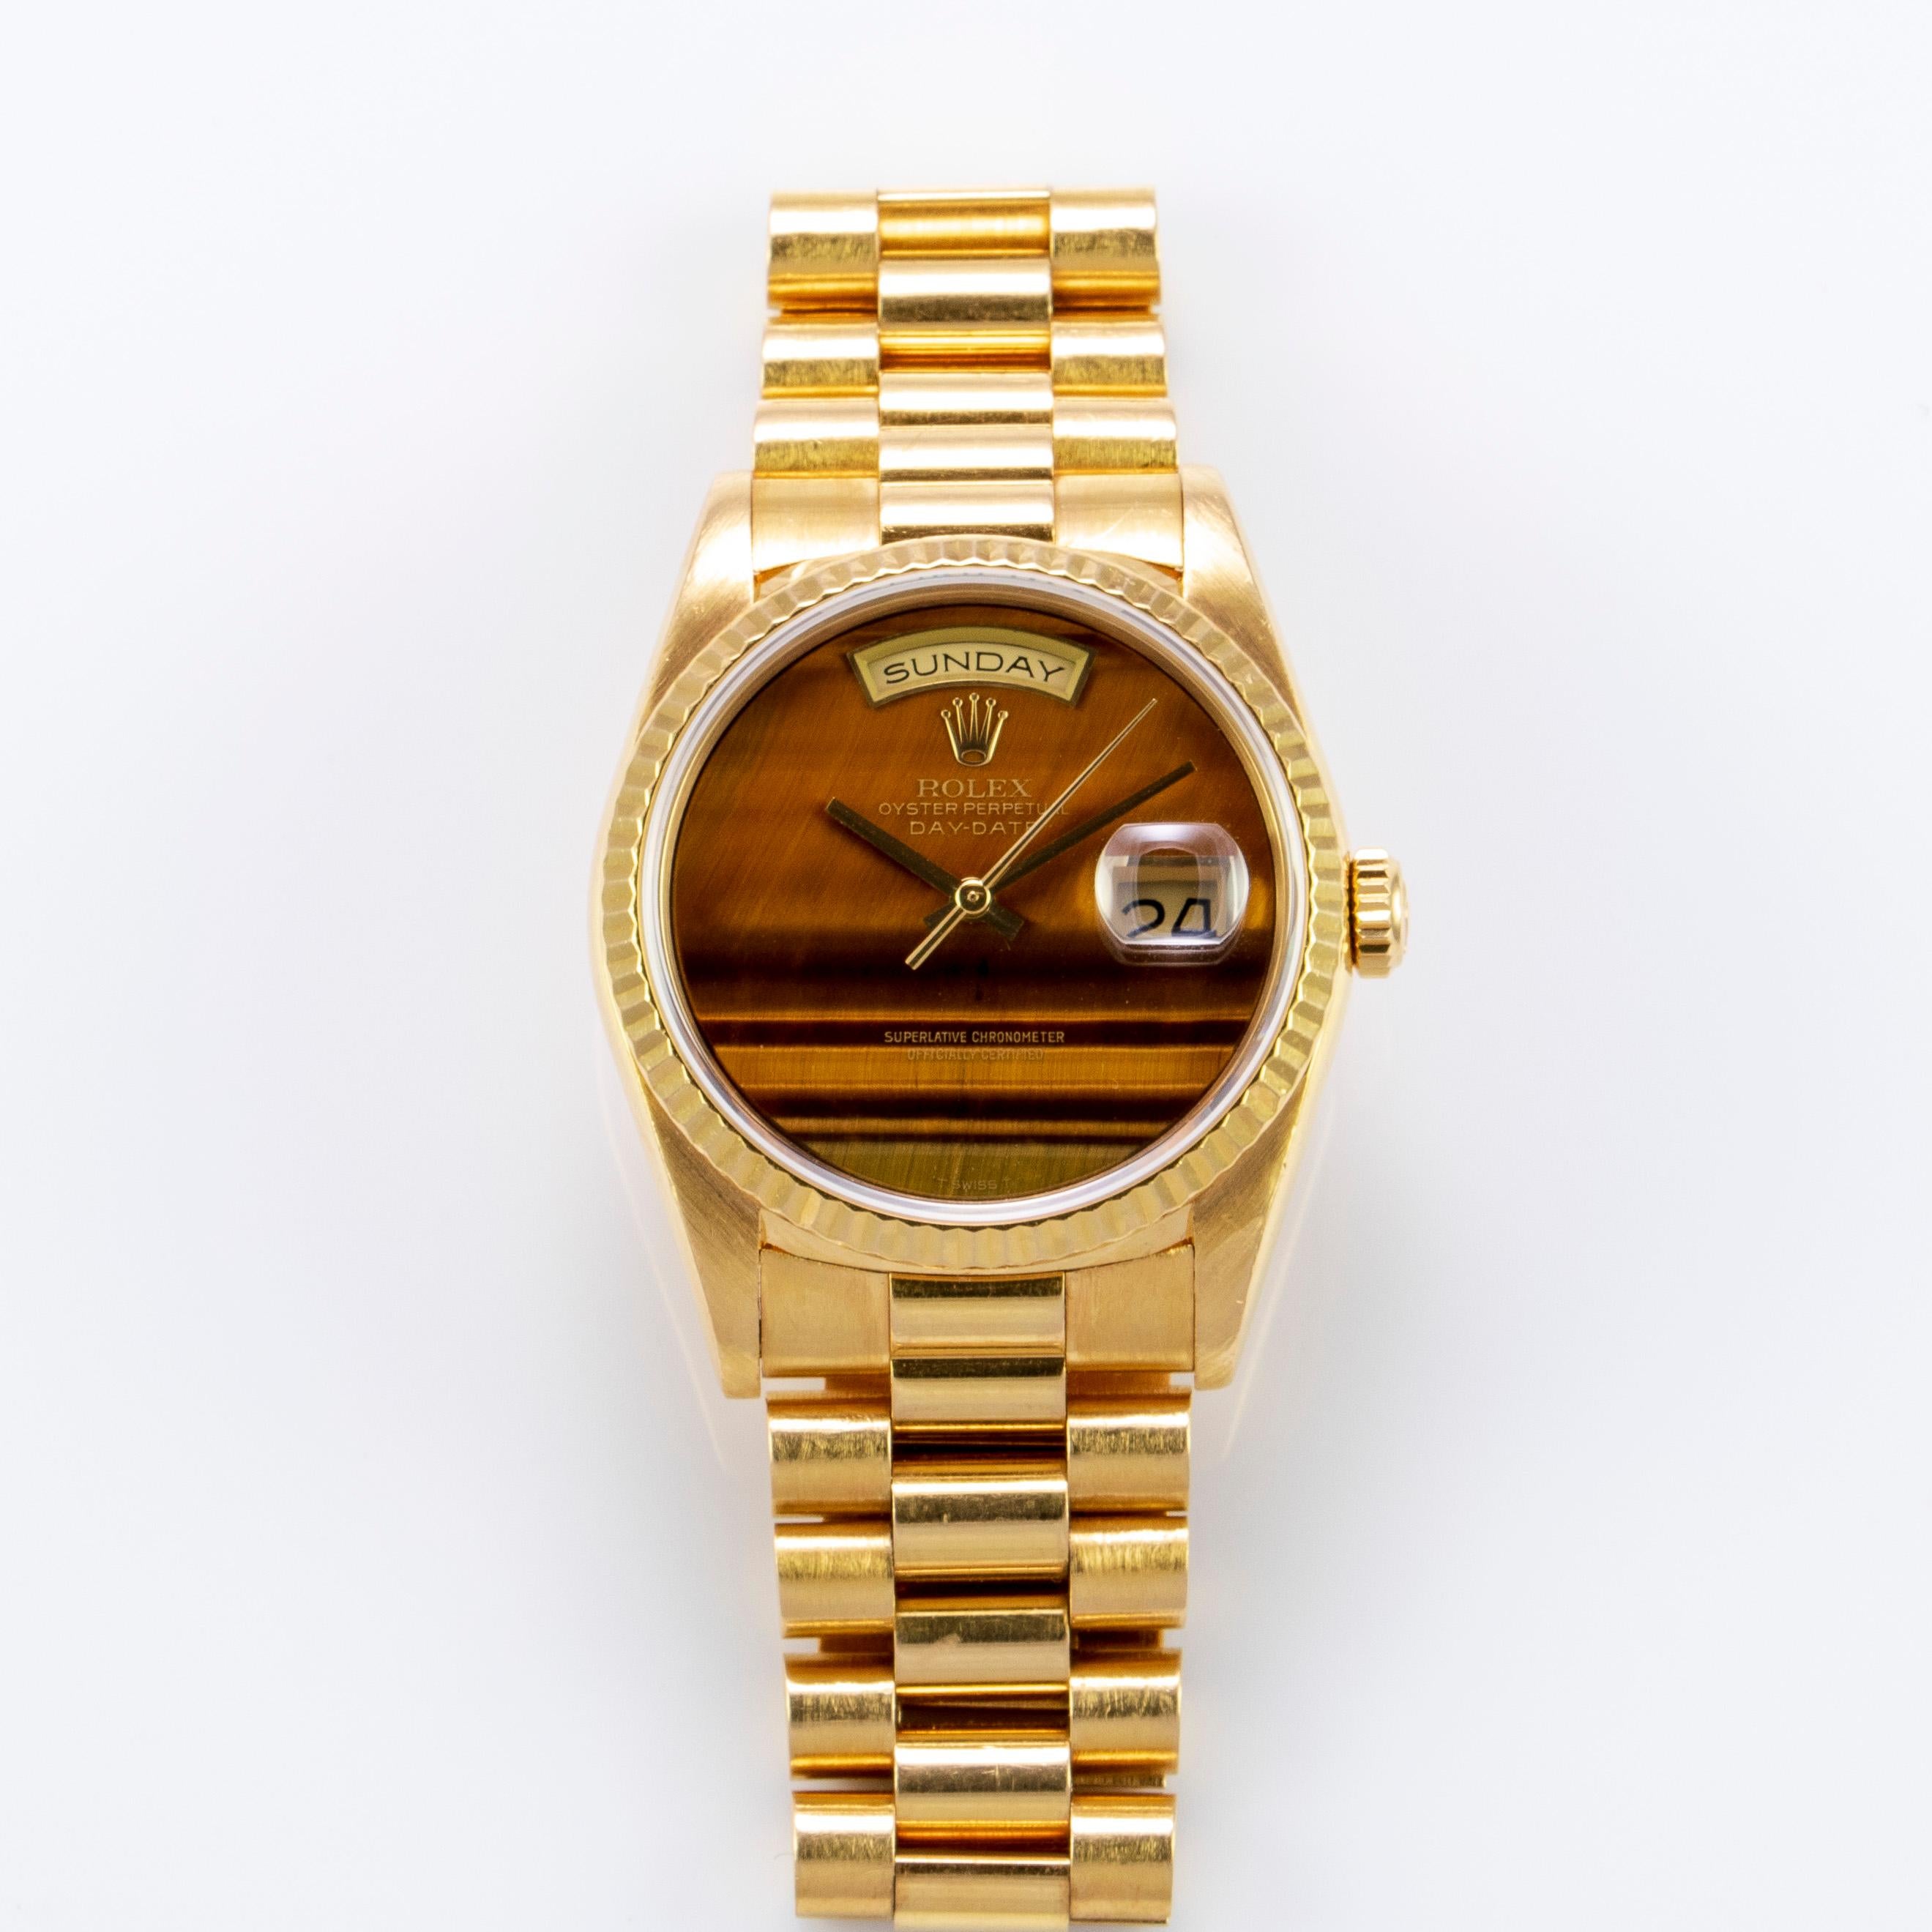 Rolex 18K Yellow Gold Day-Date Presidential Watch
Rare Factory Rolex Tiger's Eye Dial Without Hour Markers
Tiger's Eye Is One Of The Rarest Rolex Stone Dials Produced
The Dial  Has a Small Crack Seen with A Loupe and Under Magnification at Eleven